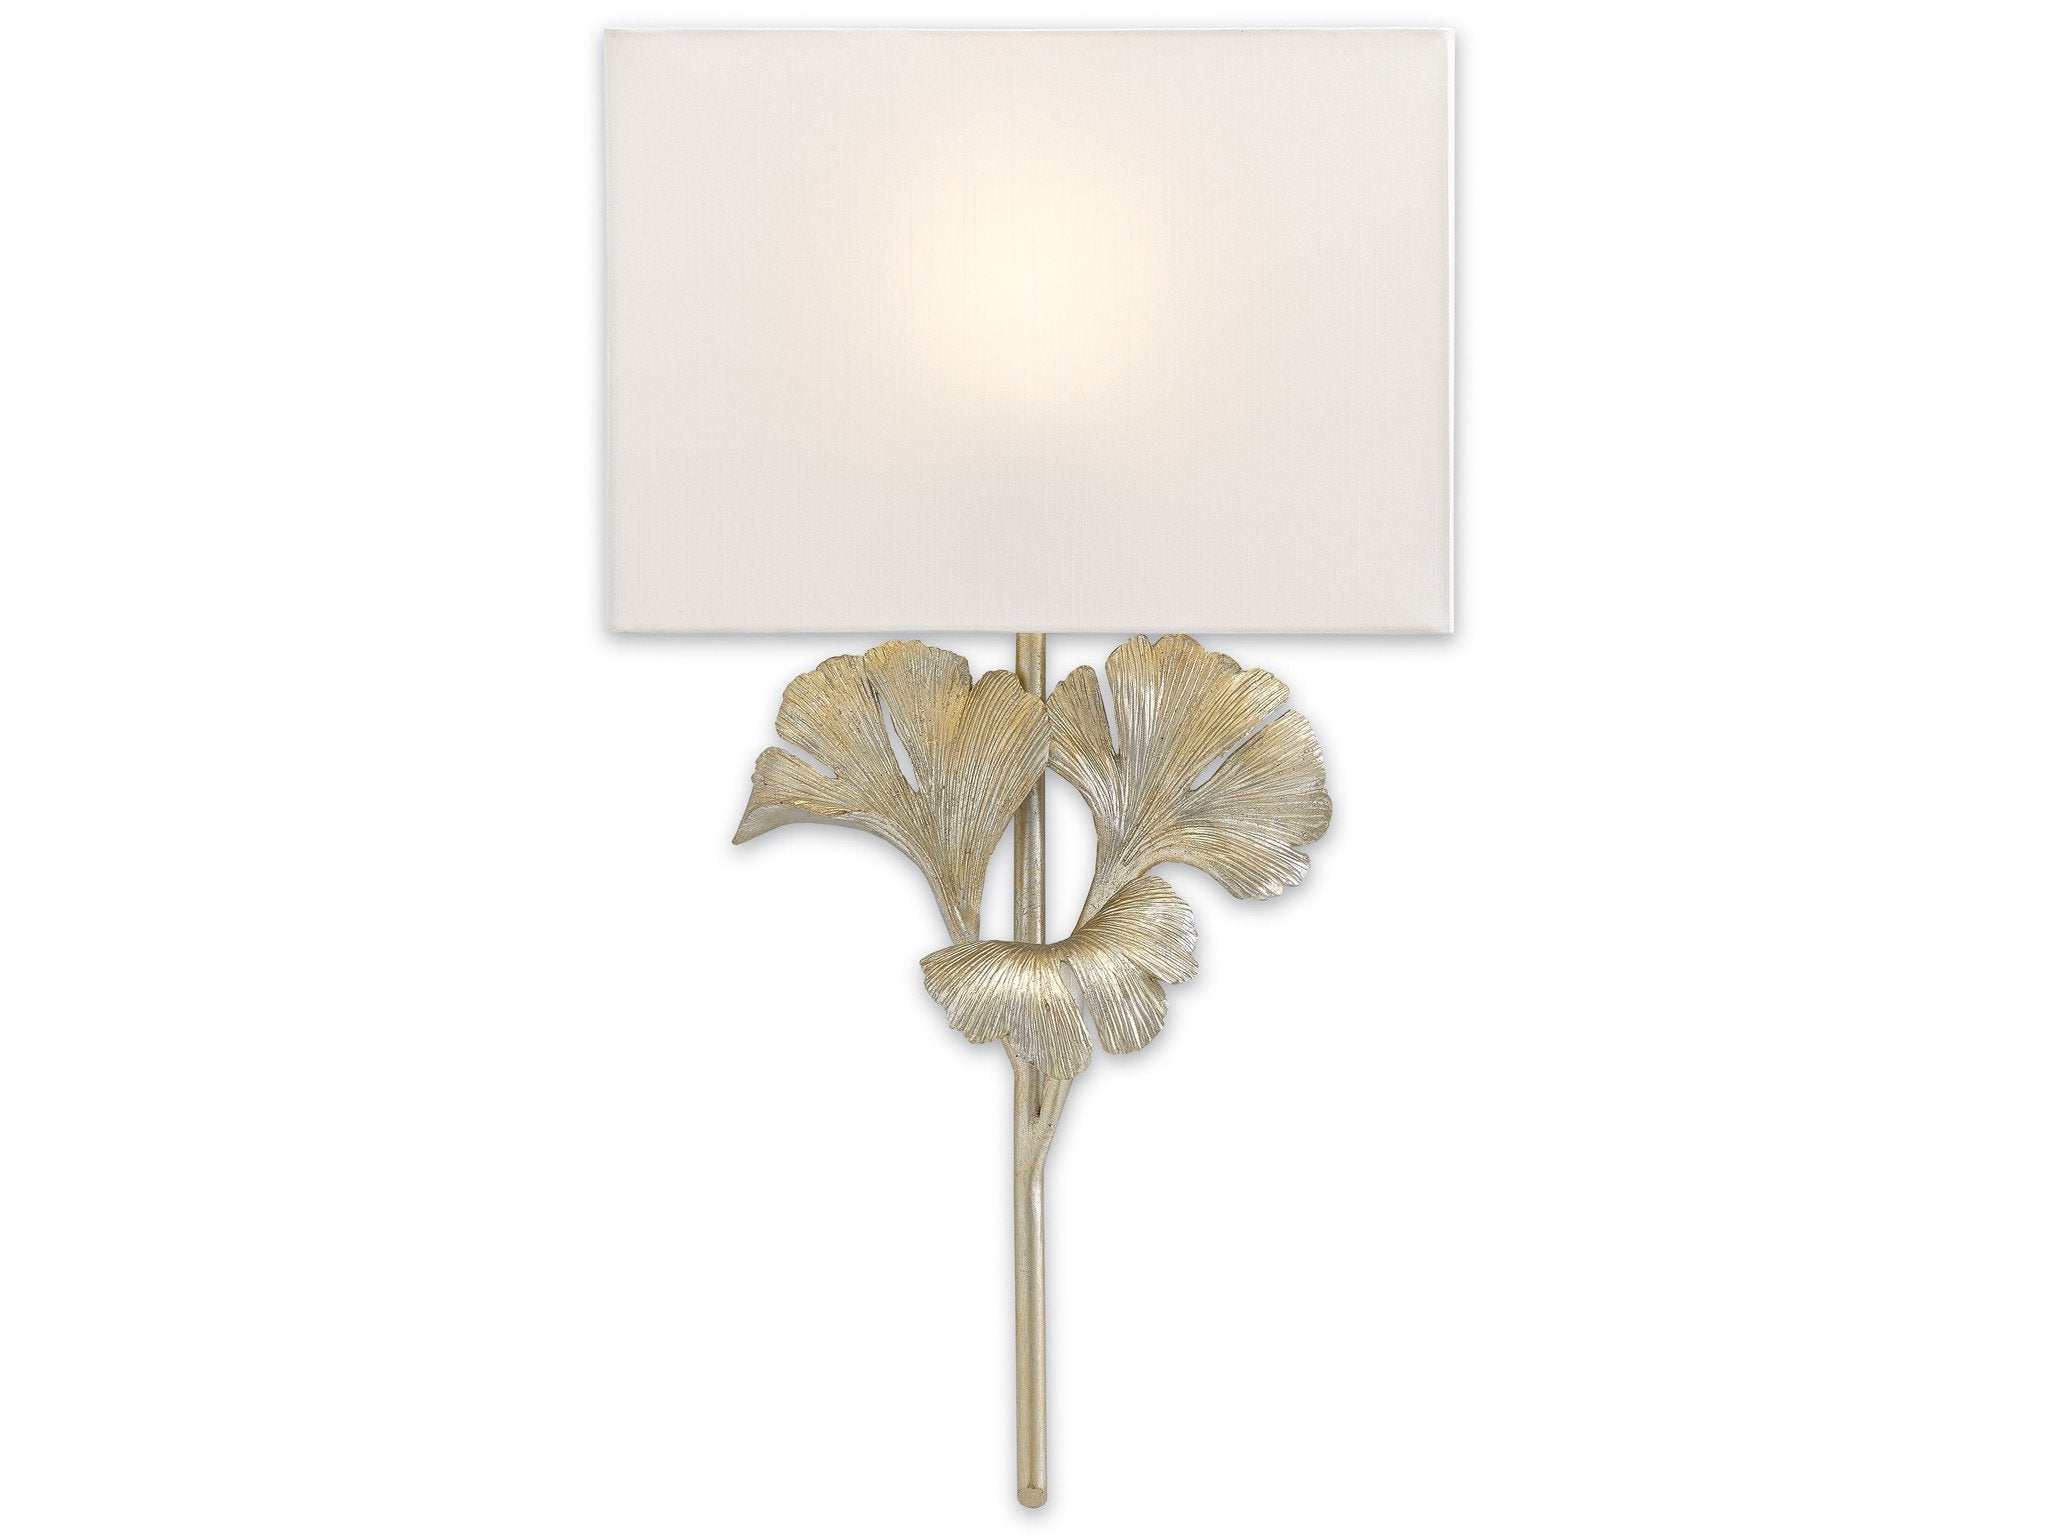 Gingko Wall Scone in Distressed Silver Leaf design by Currey and Company